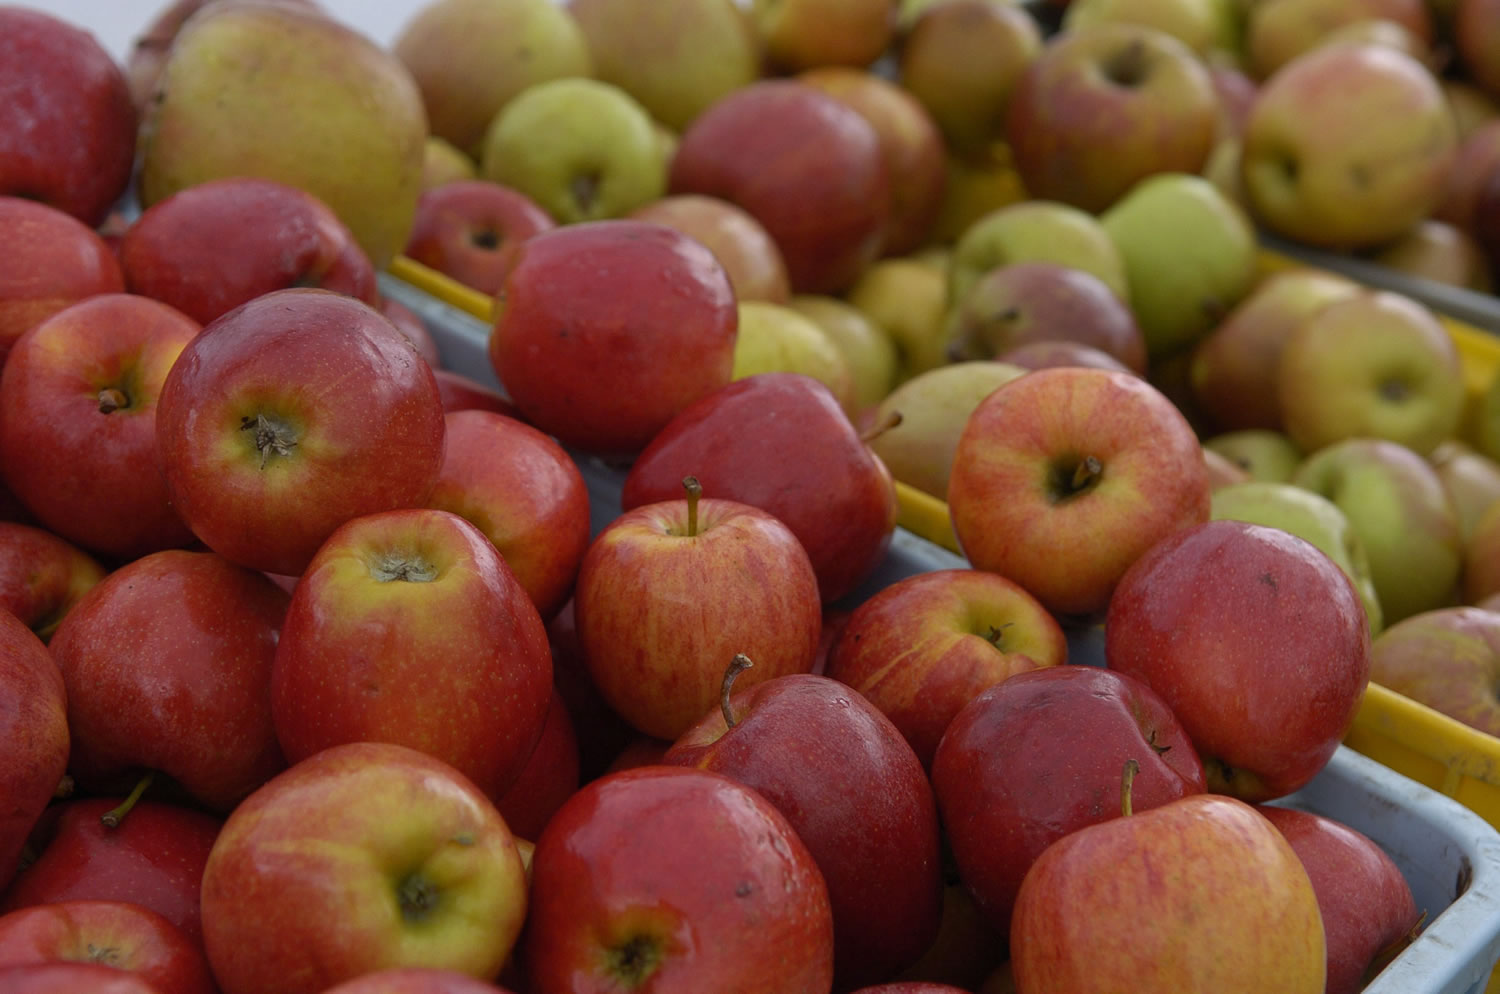 Vancouver Farmers Market vendors will be on hand for opening weekend with apples, green vegetables and a variety of other foods.